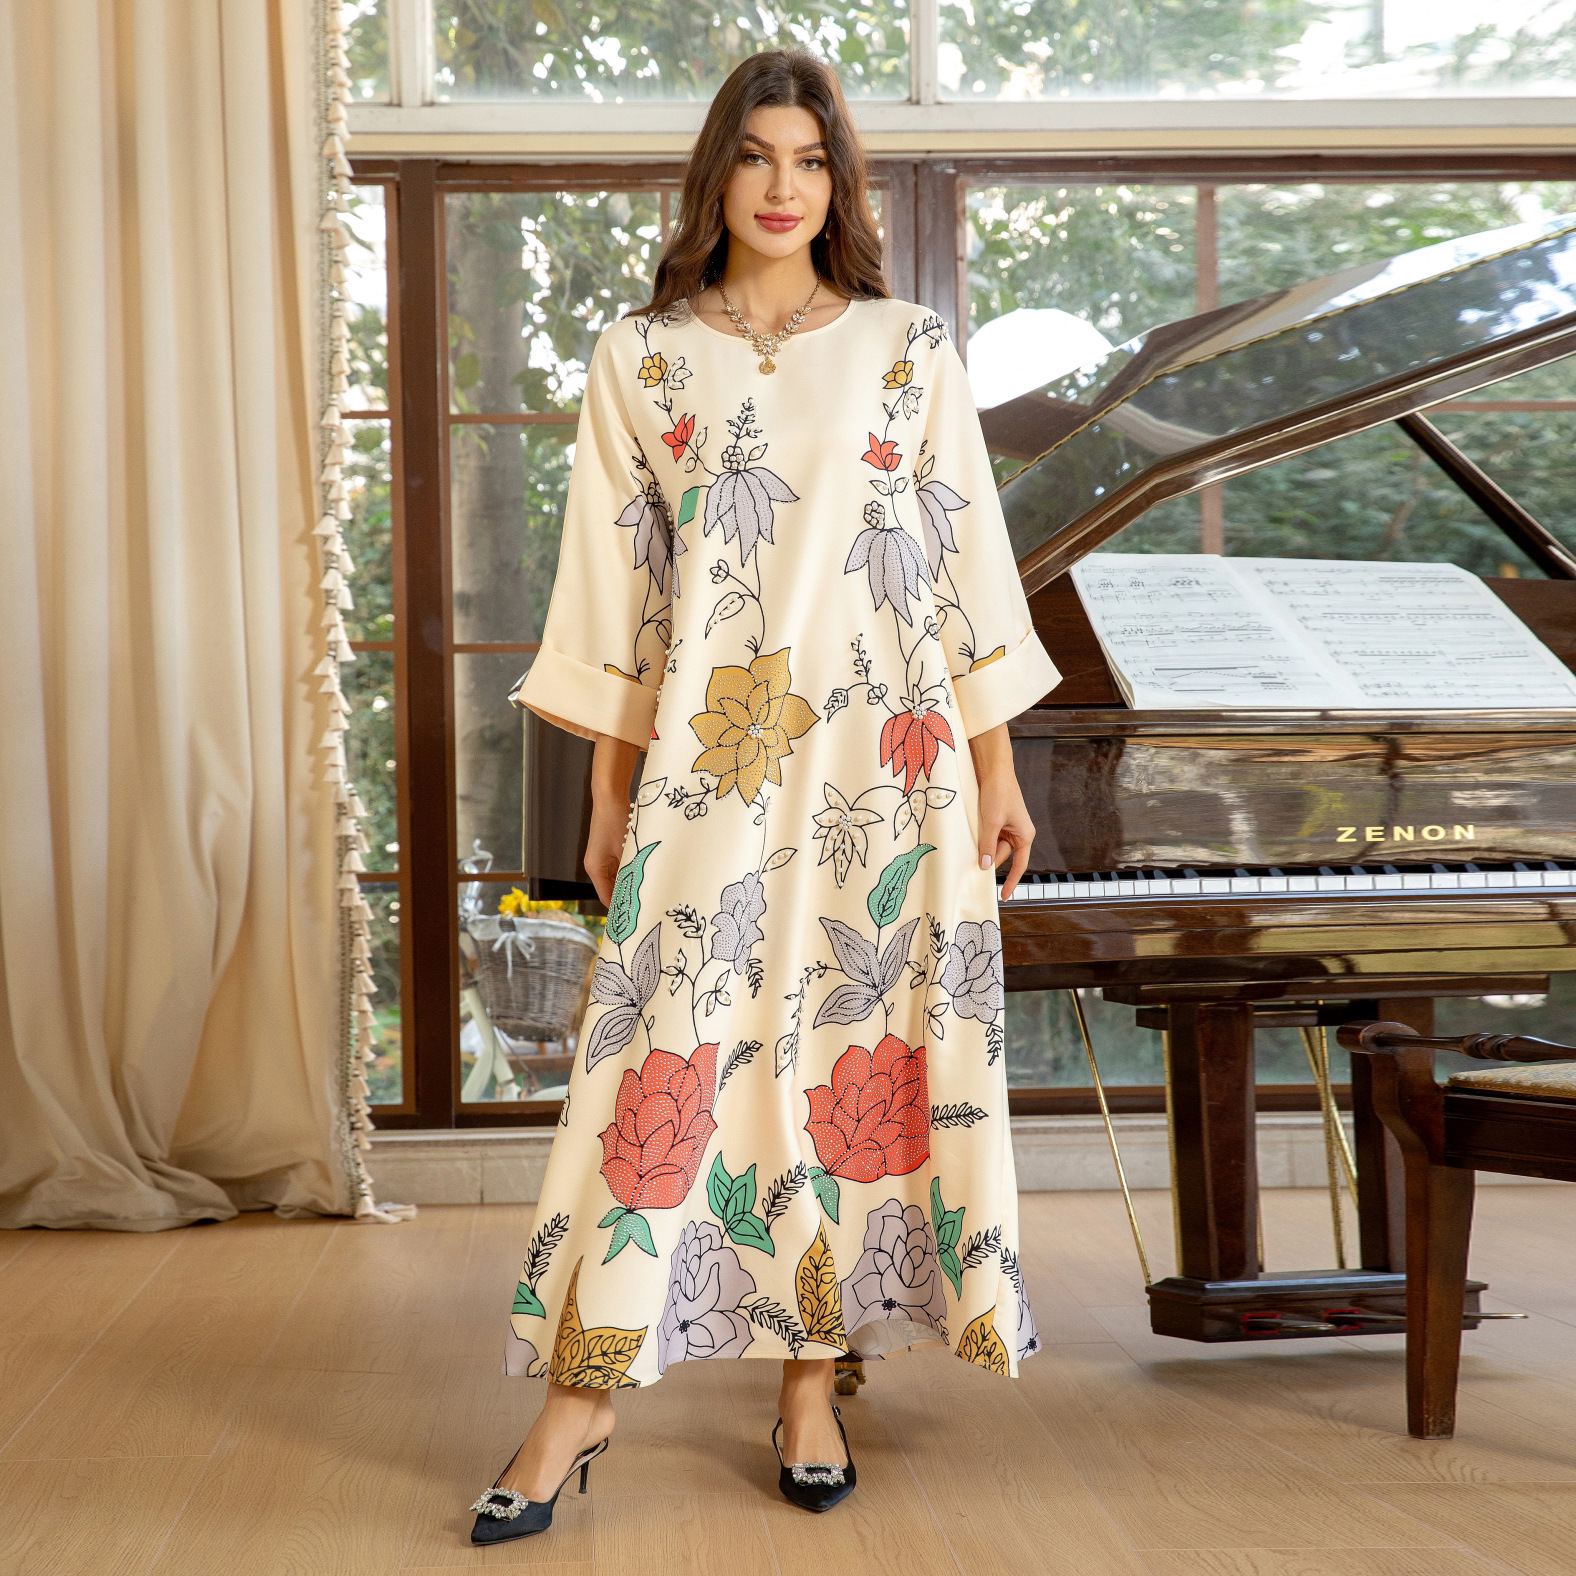 Fashionable Printed Robe with Hot-Fix Rhinestones and Beads, Muslim Eid al-Adha Middle Eastern Ethnic Style